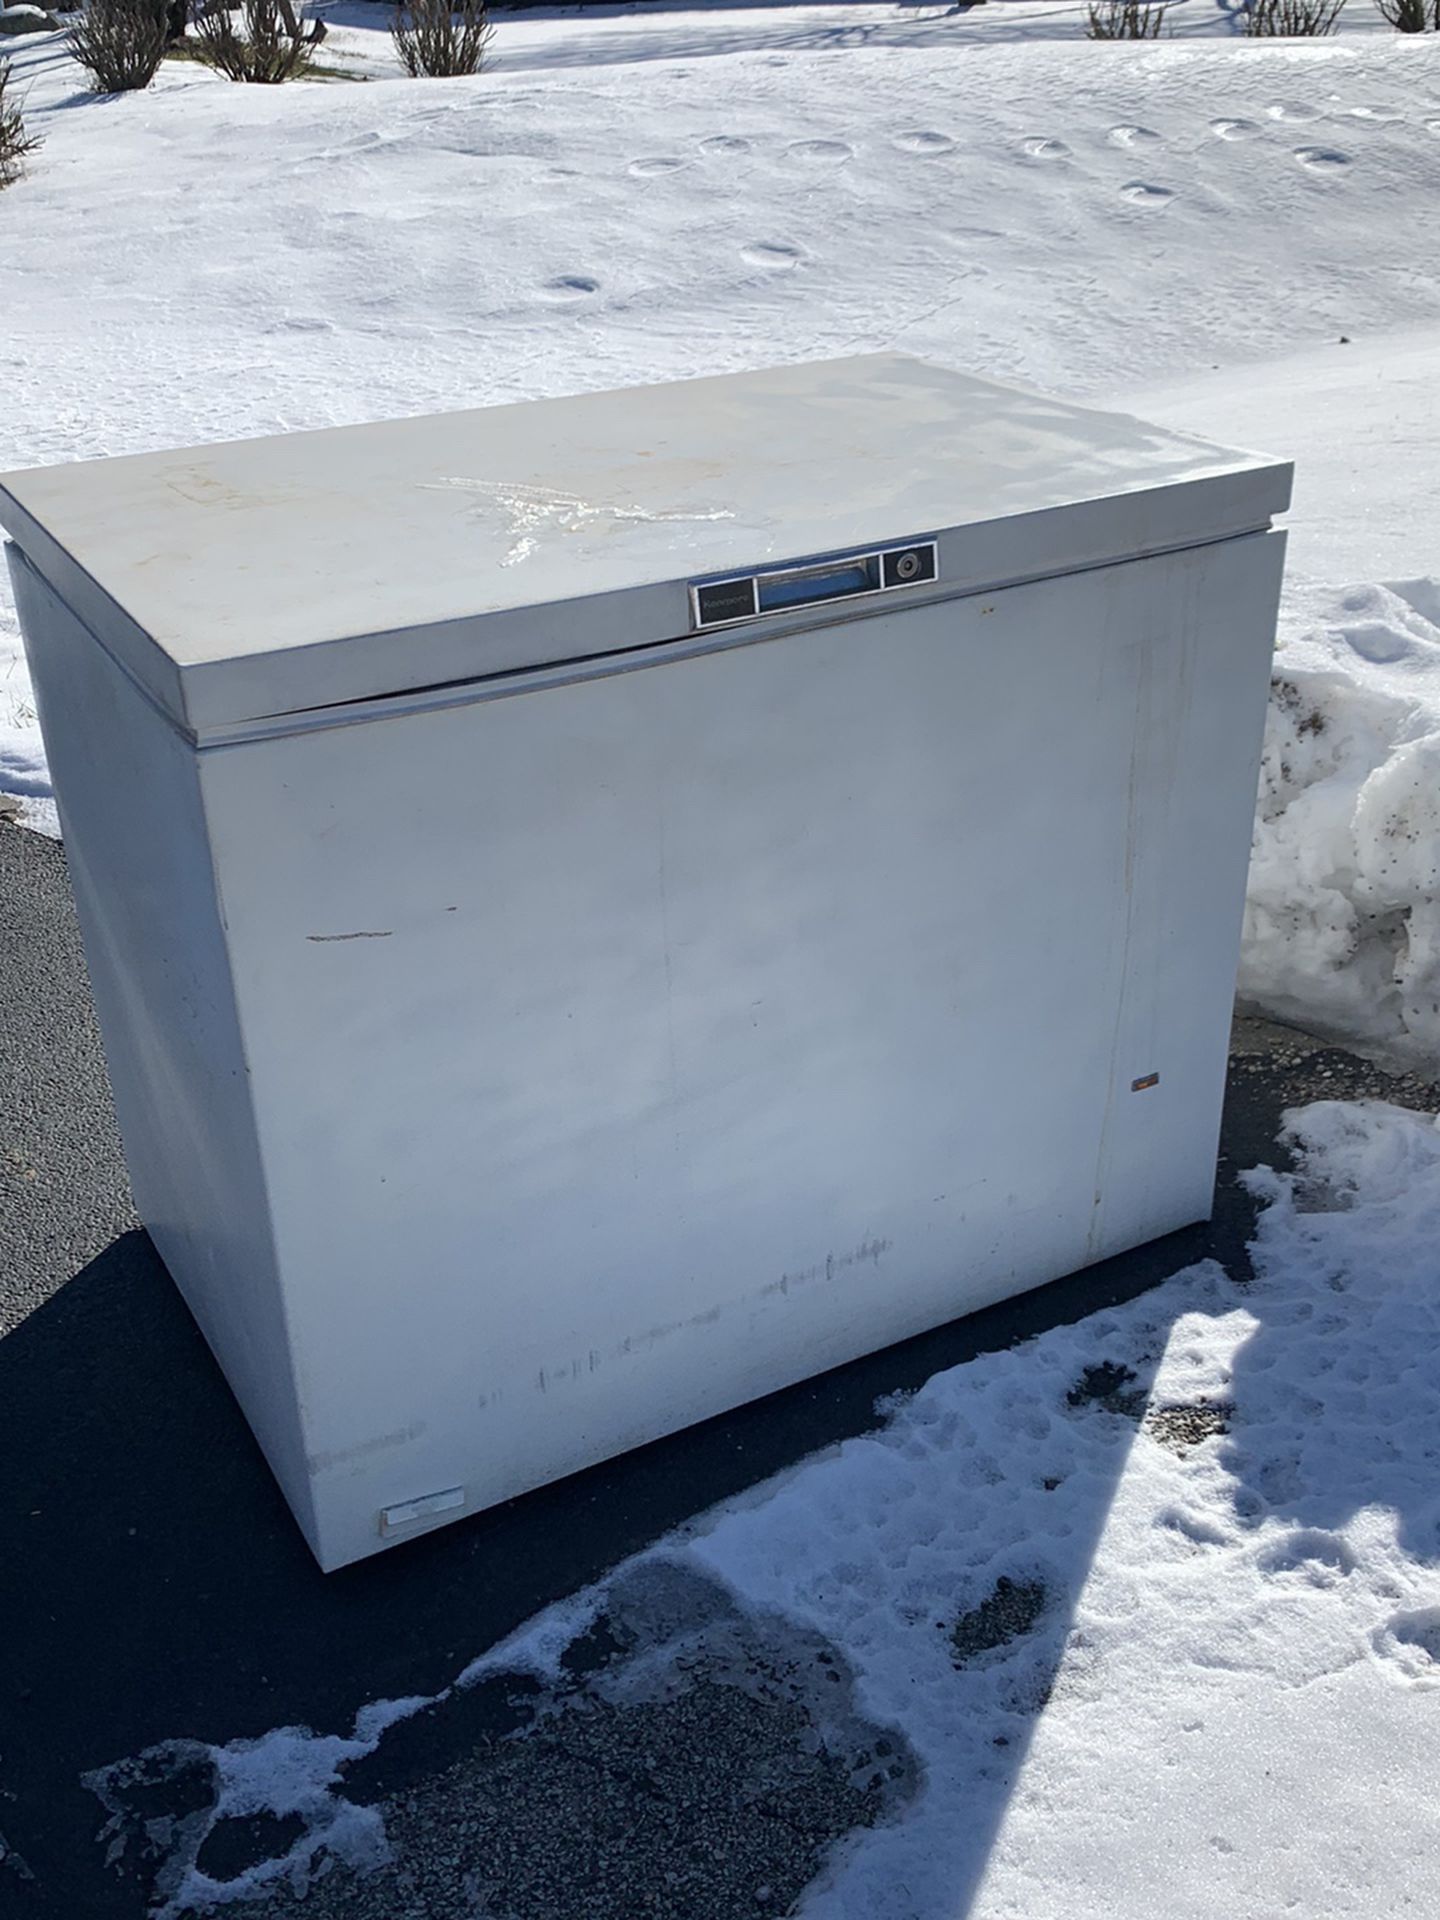 Sears Kenmore Chest Freezer “FREE”